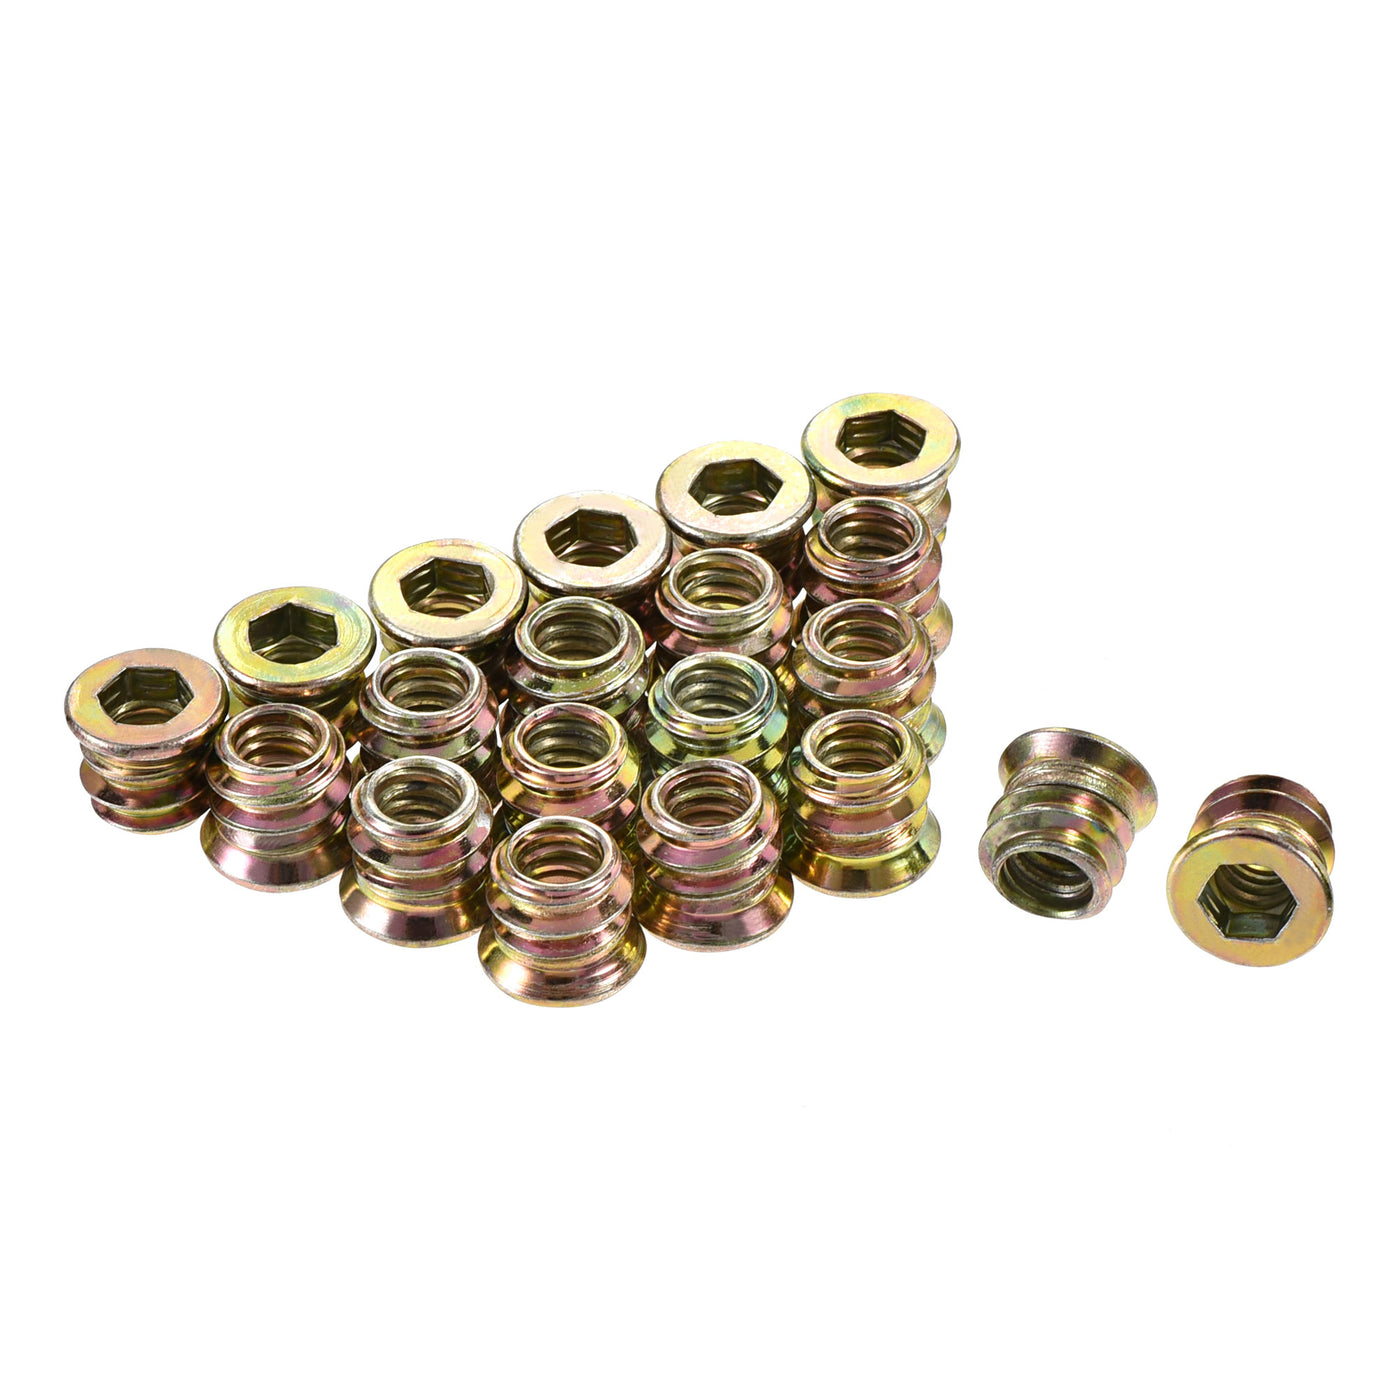 uxcell Uxcell 1/4"-20x10mm Threaded Insert Nuts Hex Socket Drive for Wood Furniture 100pcs